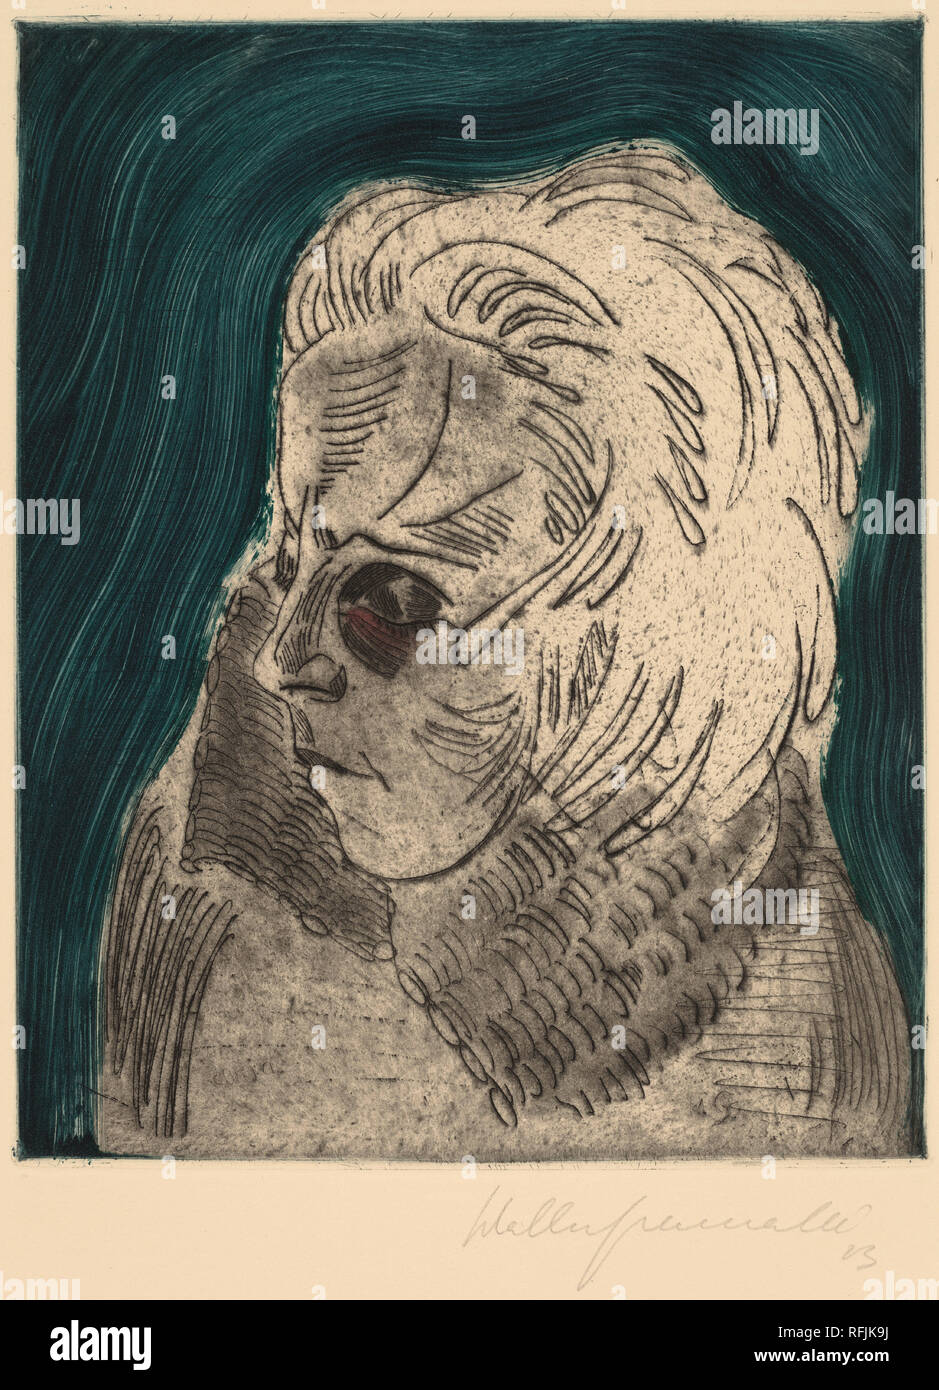 Tired Woman, Sonia Gramatté (Müder Mädchenkopf, Sonia Gramatté). Dated: 1923. Dimensions: sheet: 54 × 38 cm (21 1/4 × 14 15/16 in.)  plate: 30 × 23.5 cm (11 13/16 × 9 1/4 in.). Medium: engraving and etching, printed in black with blue-green and red wiping. Museum: National Gallery of Art, Washington DC. Author: Walter Gramatté. Stock Photo